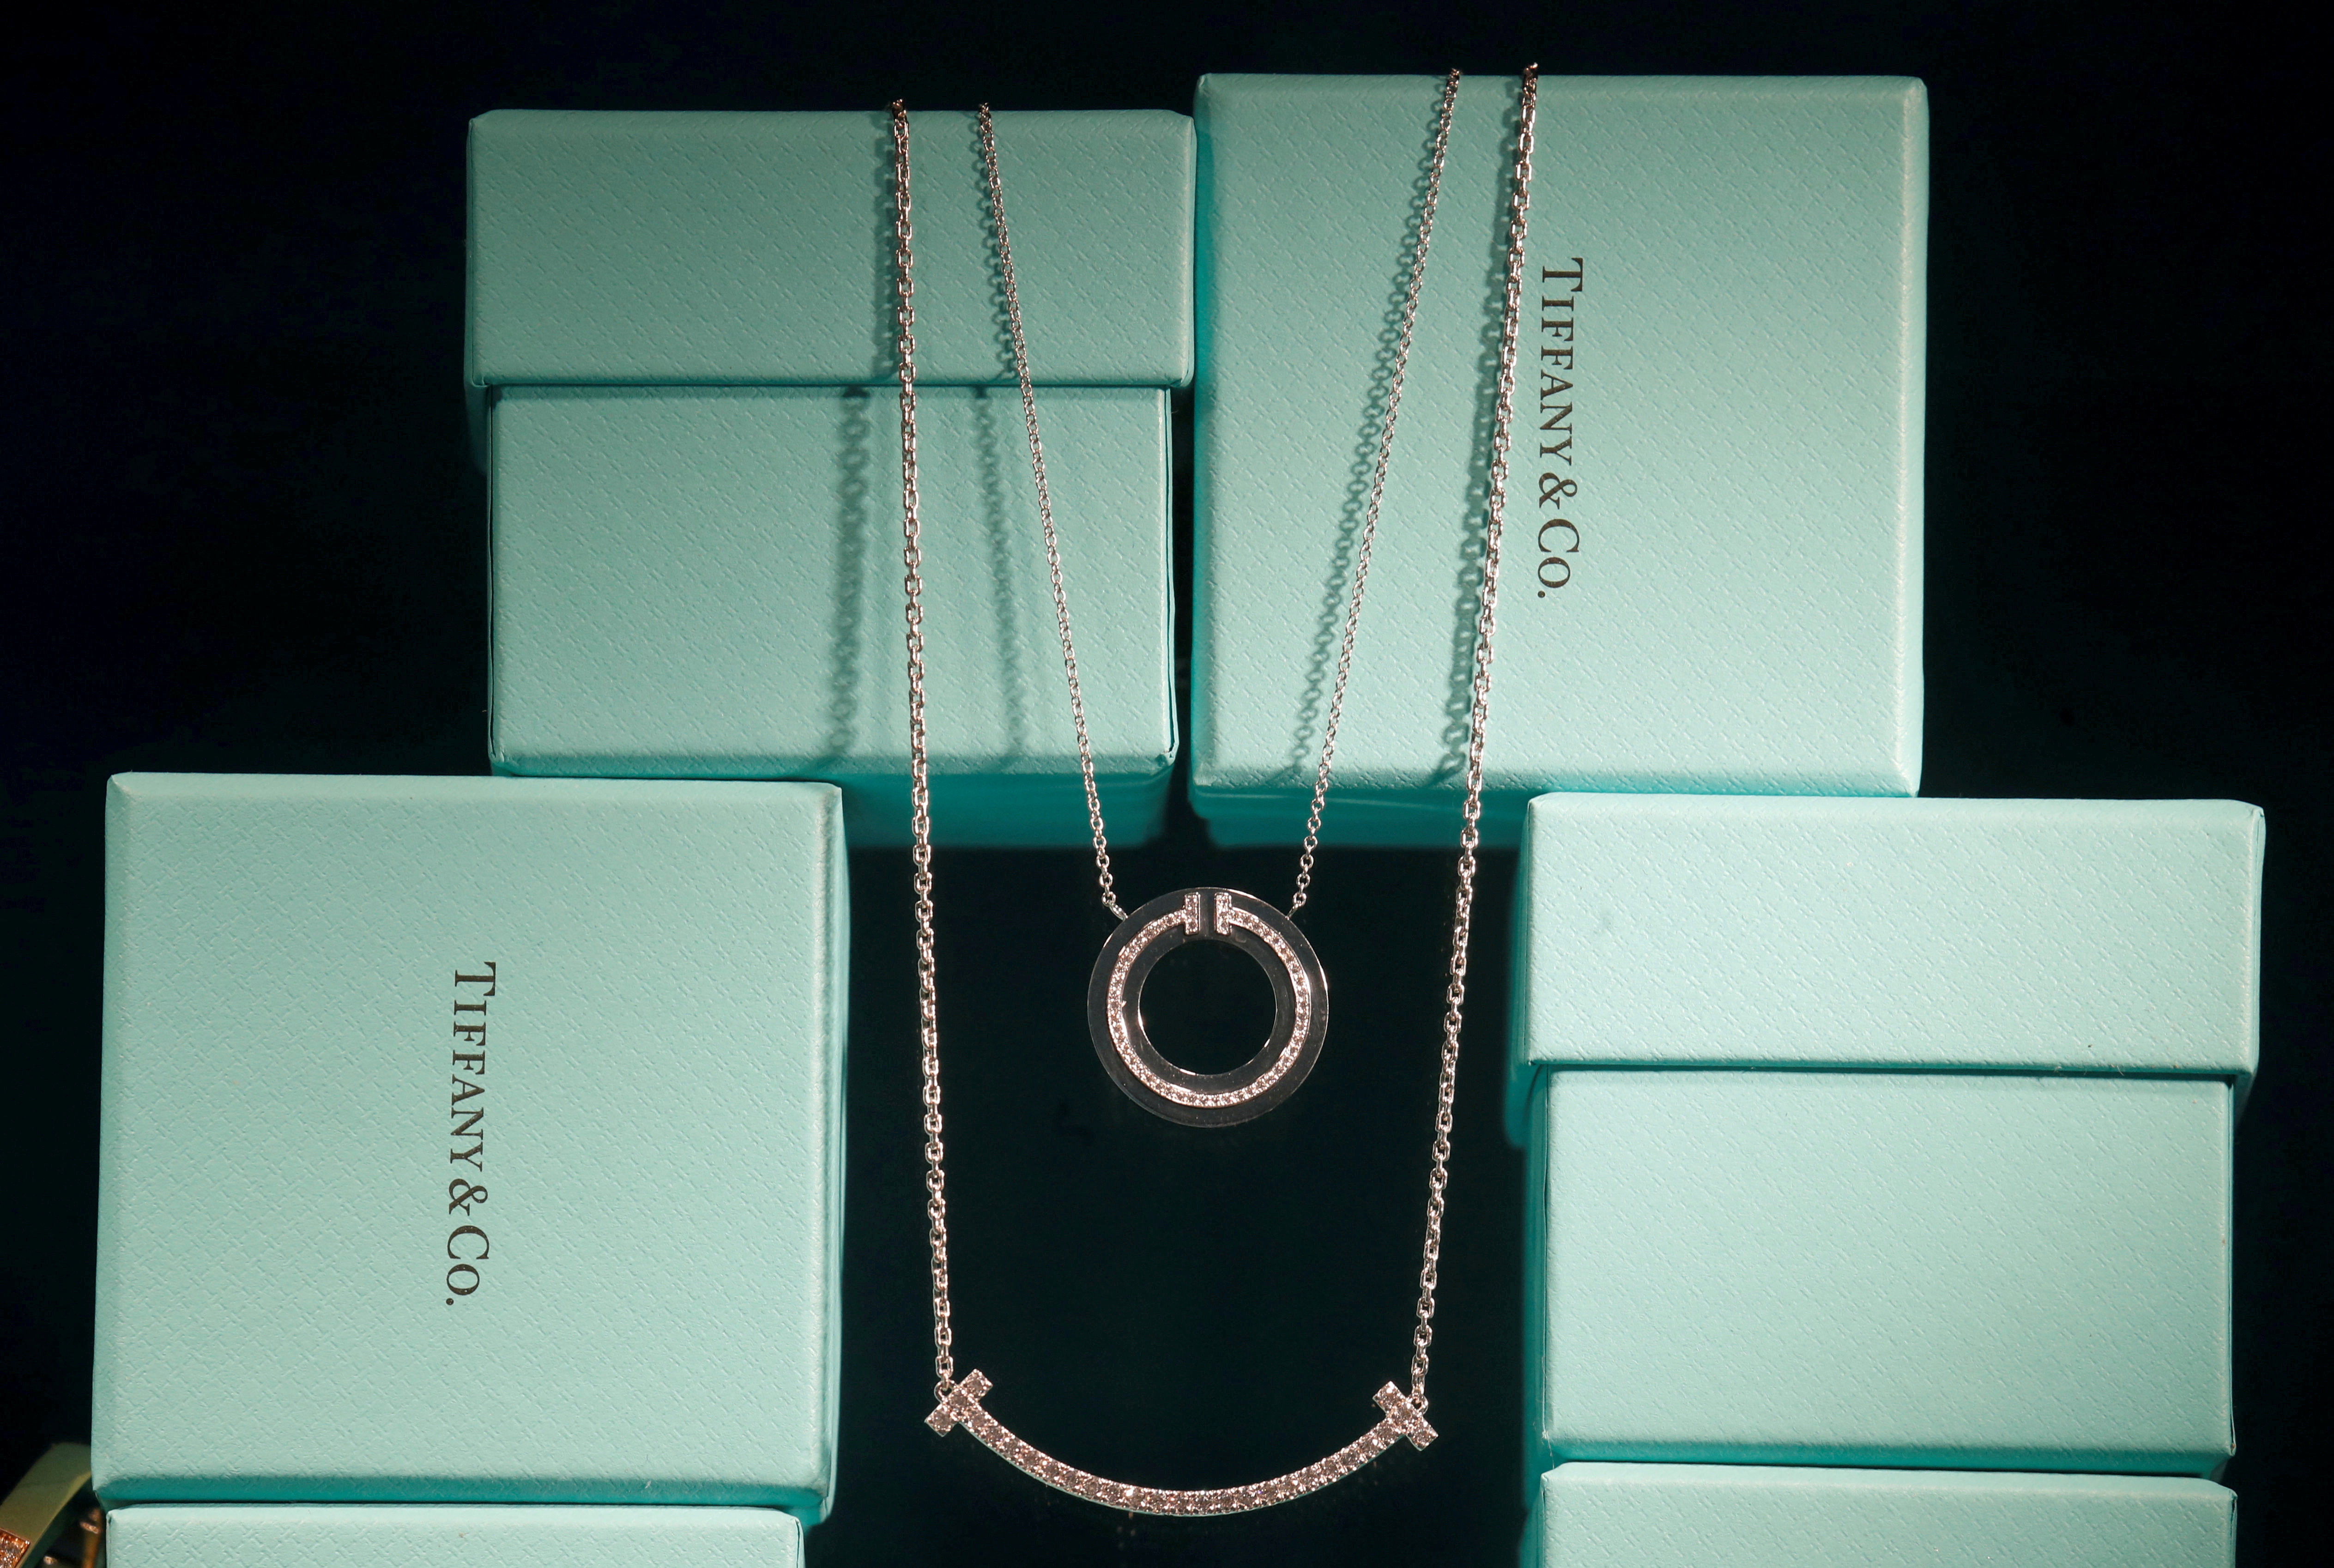 Tiffany & Co. jewelry is displayed in a store in Paris